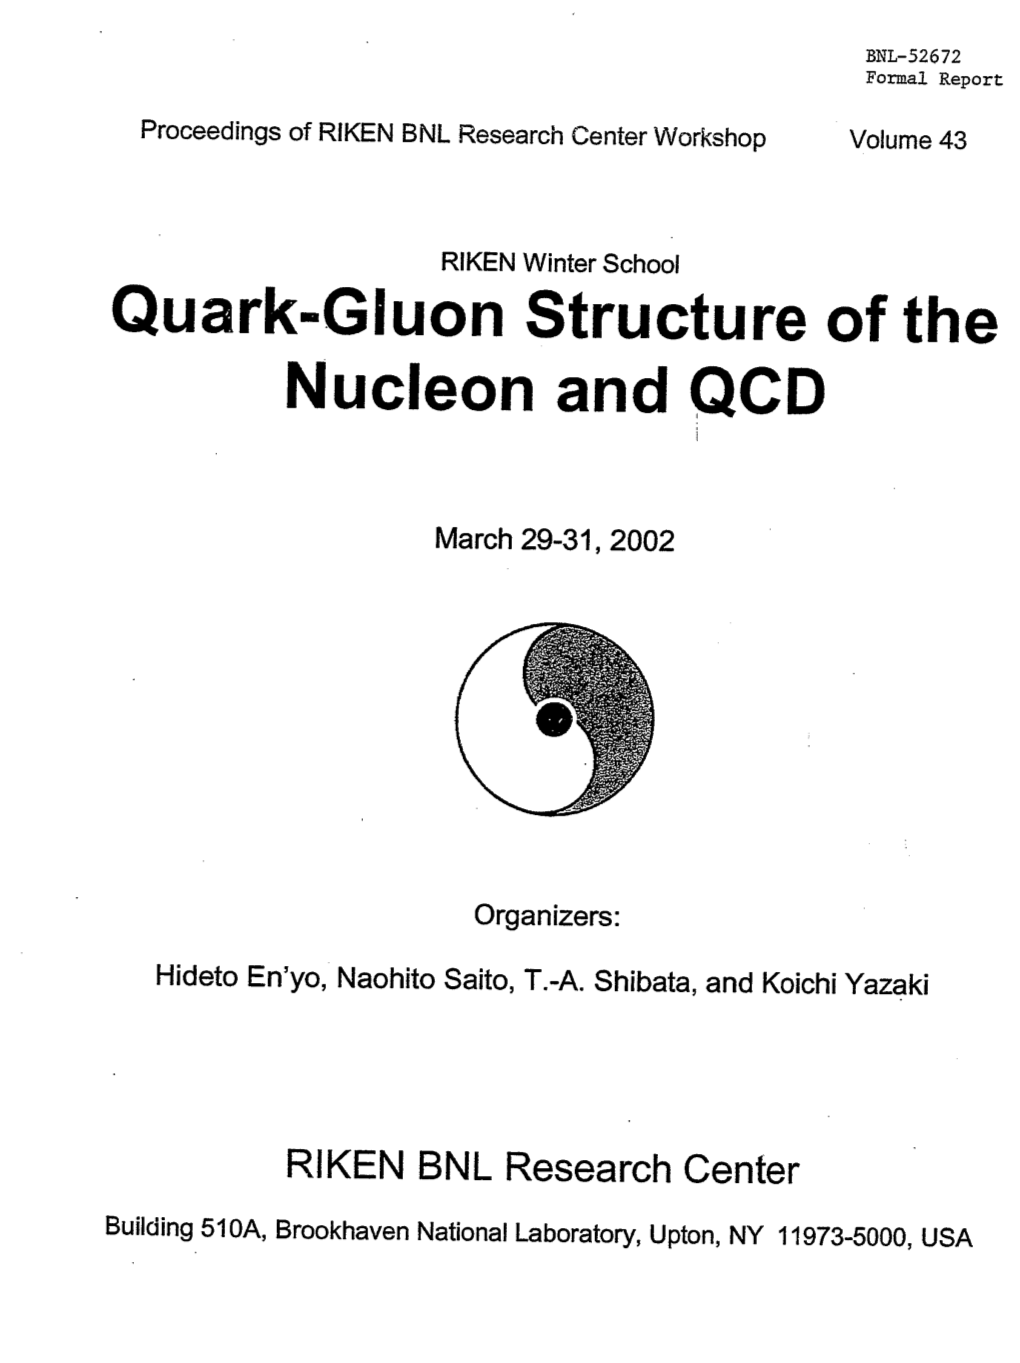 Quark-Gluon Structure of the Nucleon and QCD